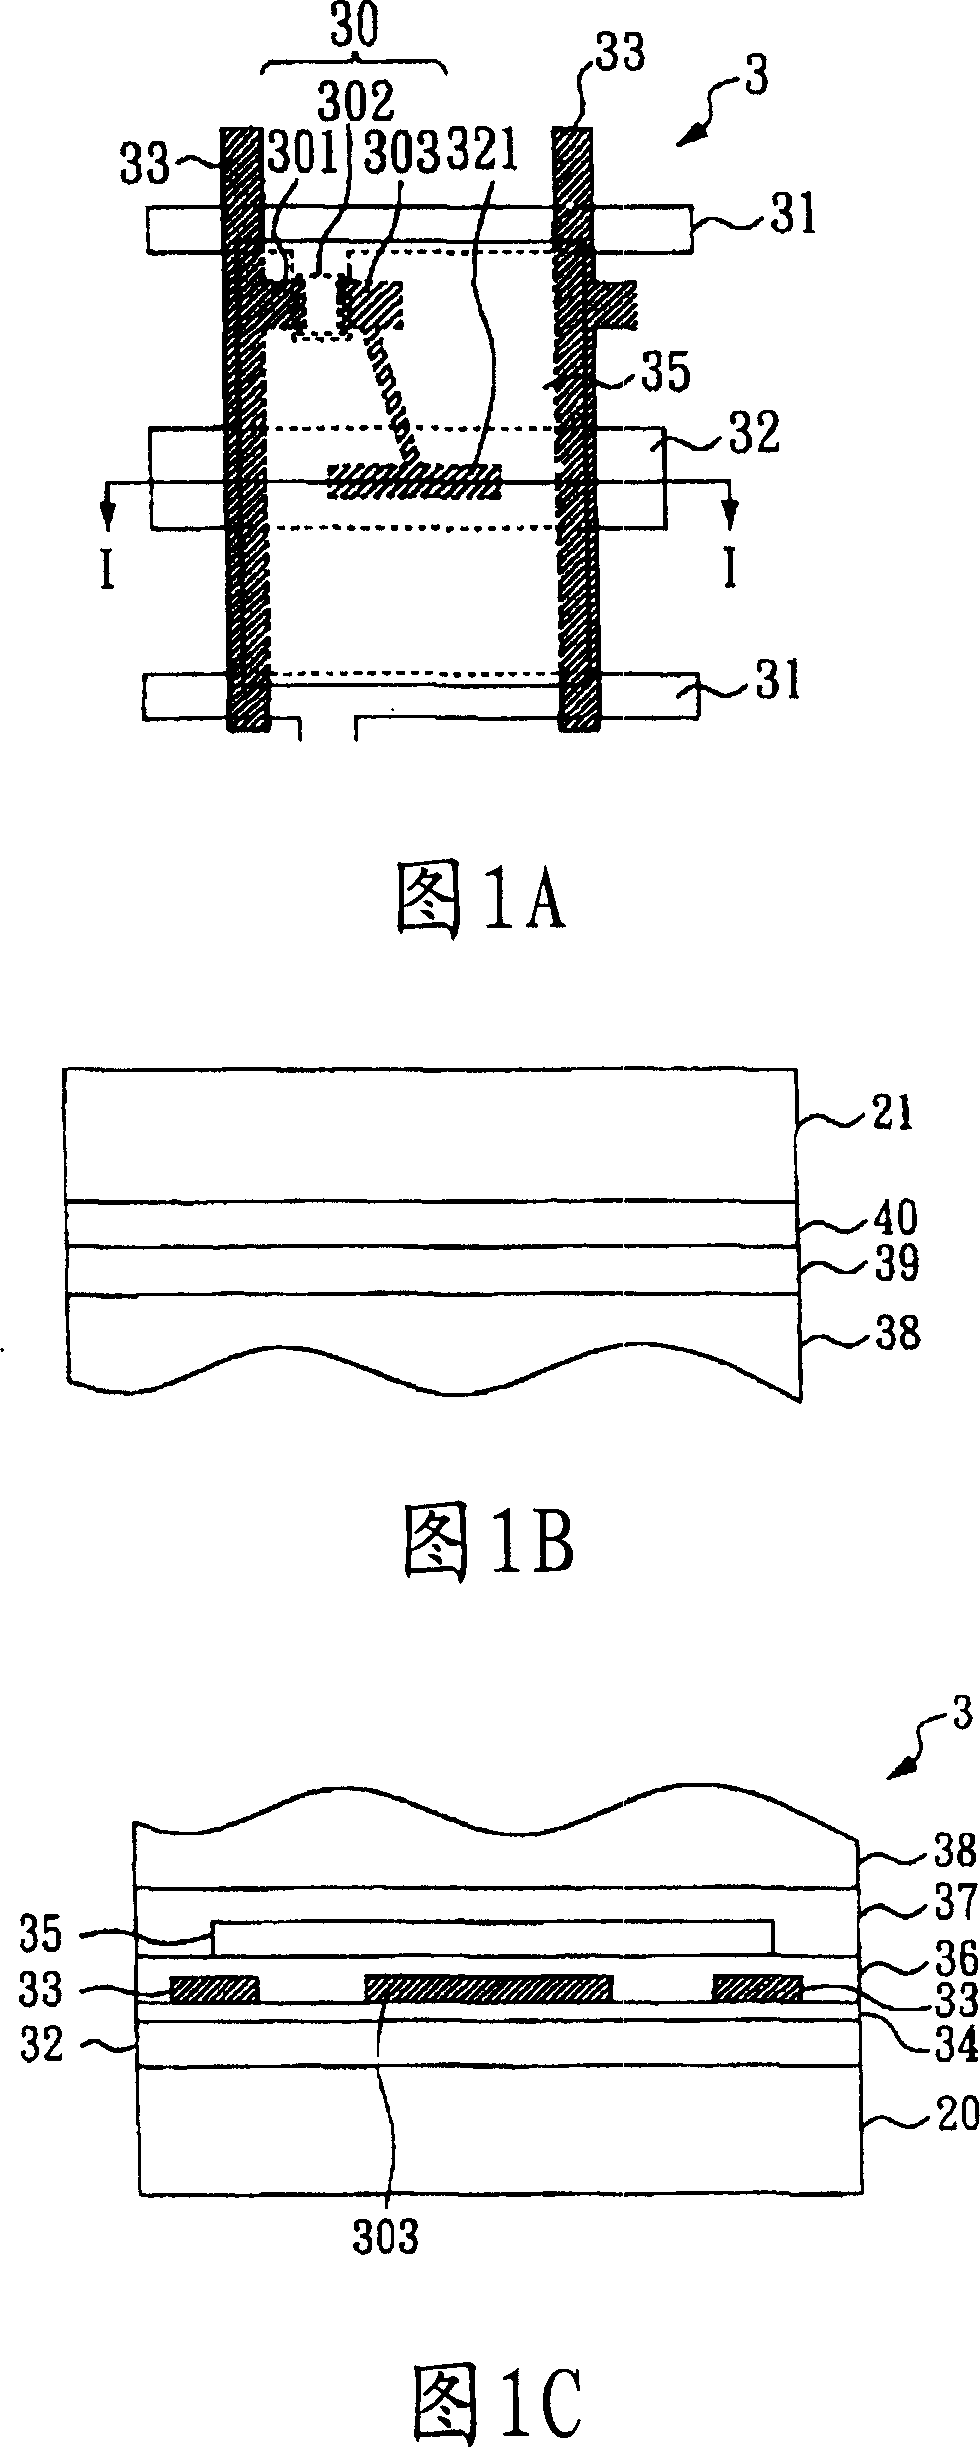 Liquid crystal display faceplate, and base plate of array in active mode